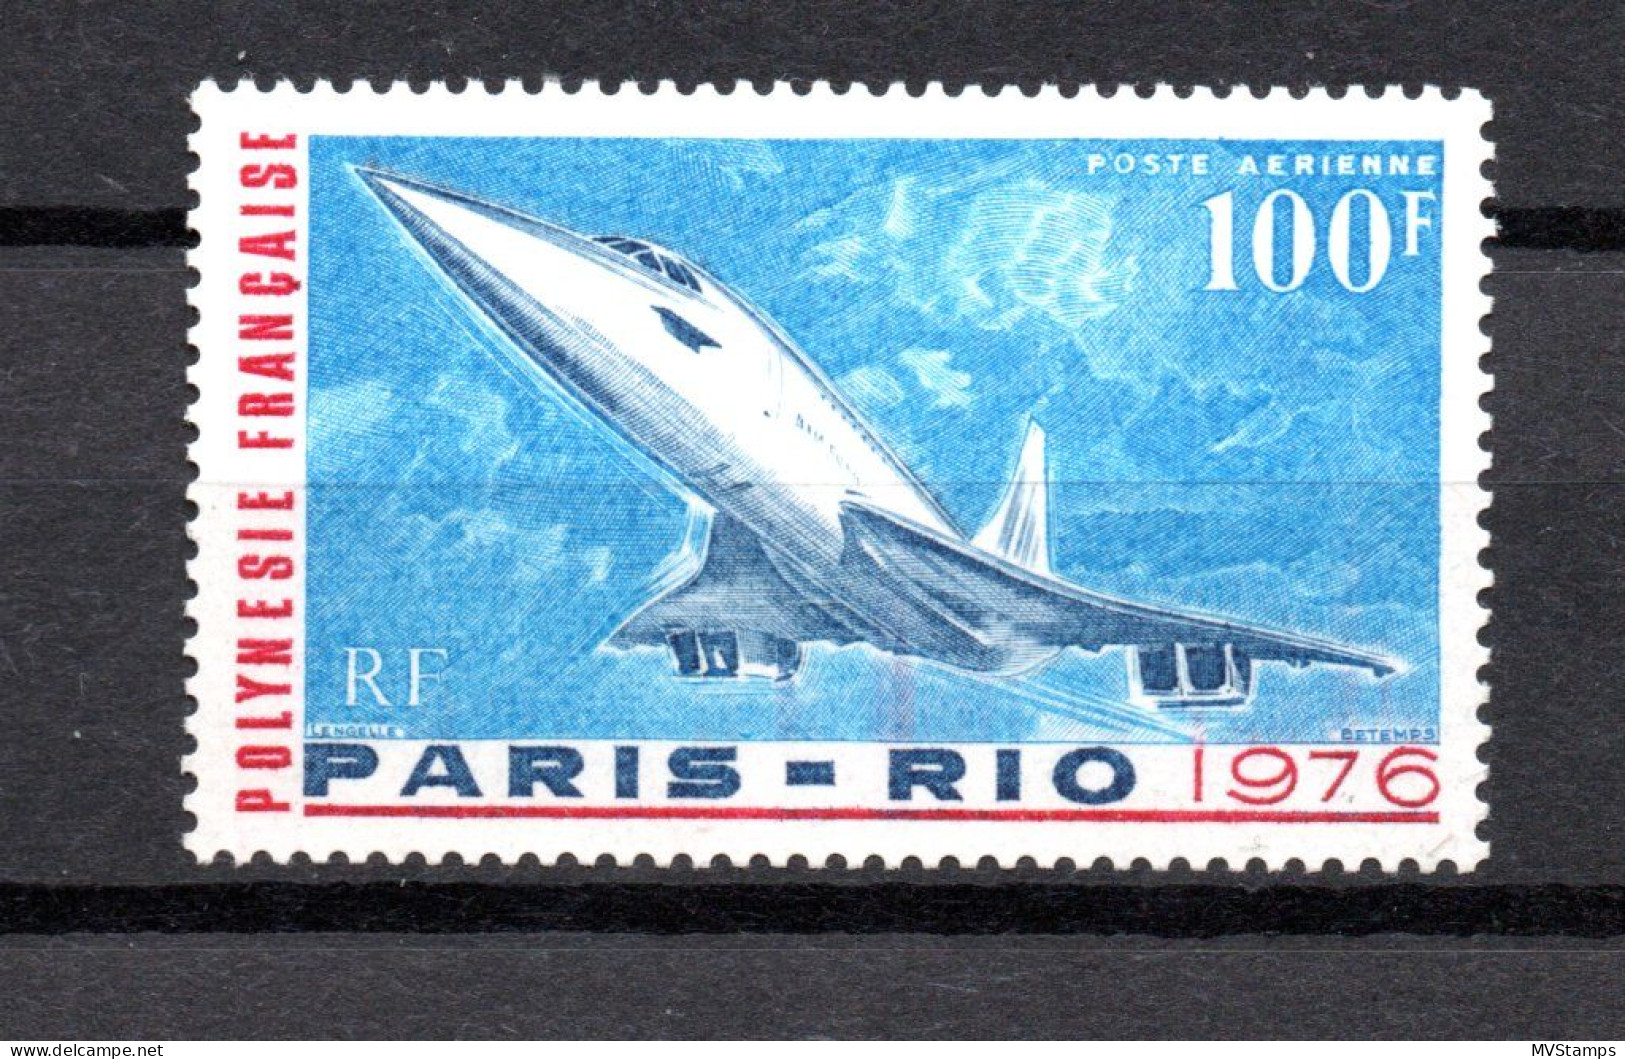 Polynesia (France ) 1976 Concorde/Aviation/airmail Stamp (Michel 208) MNH - Unused Stamps